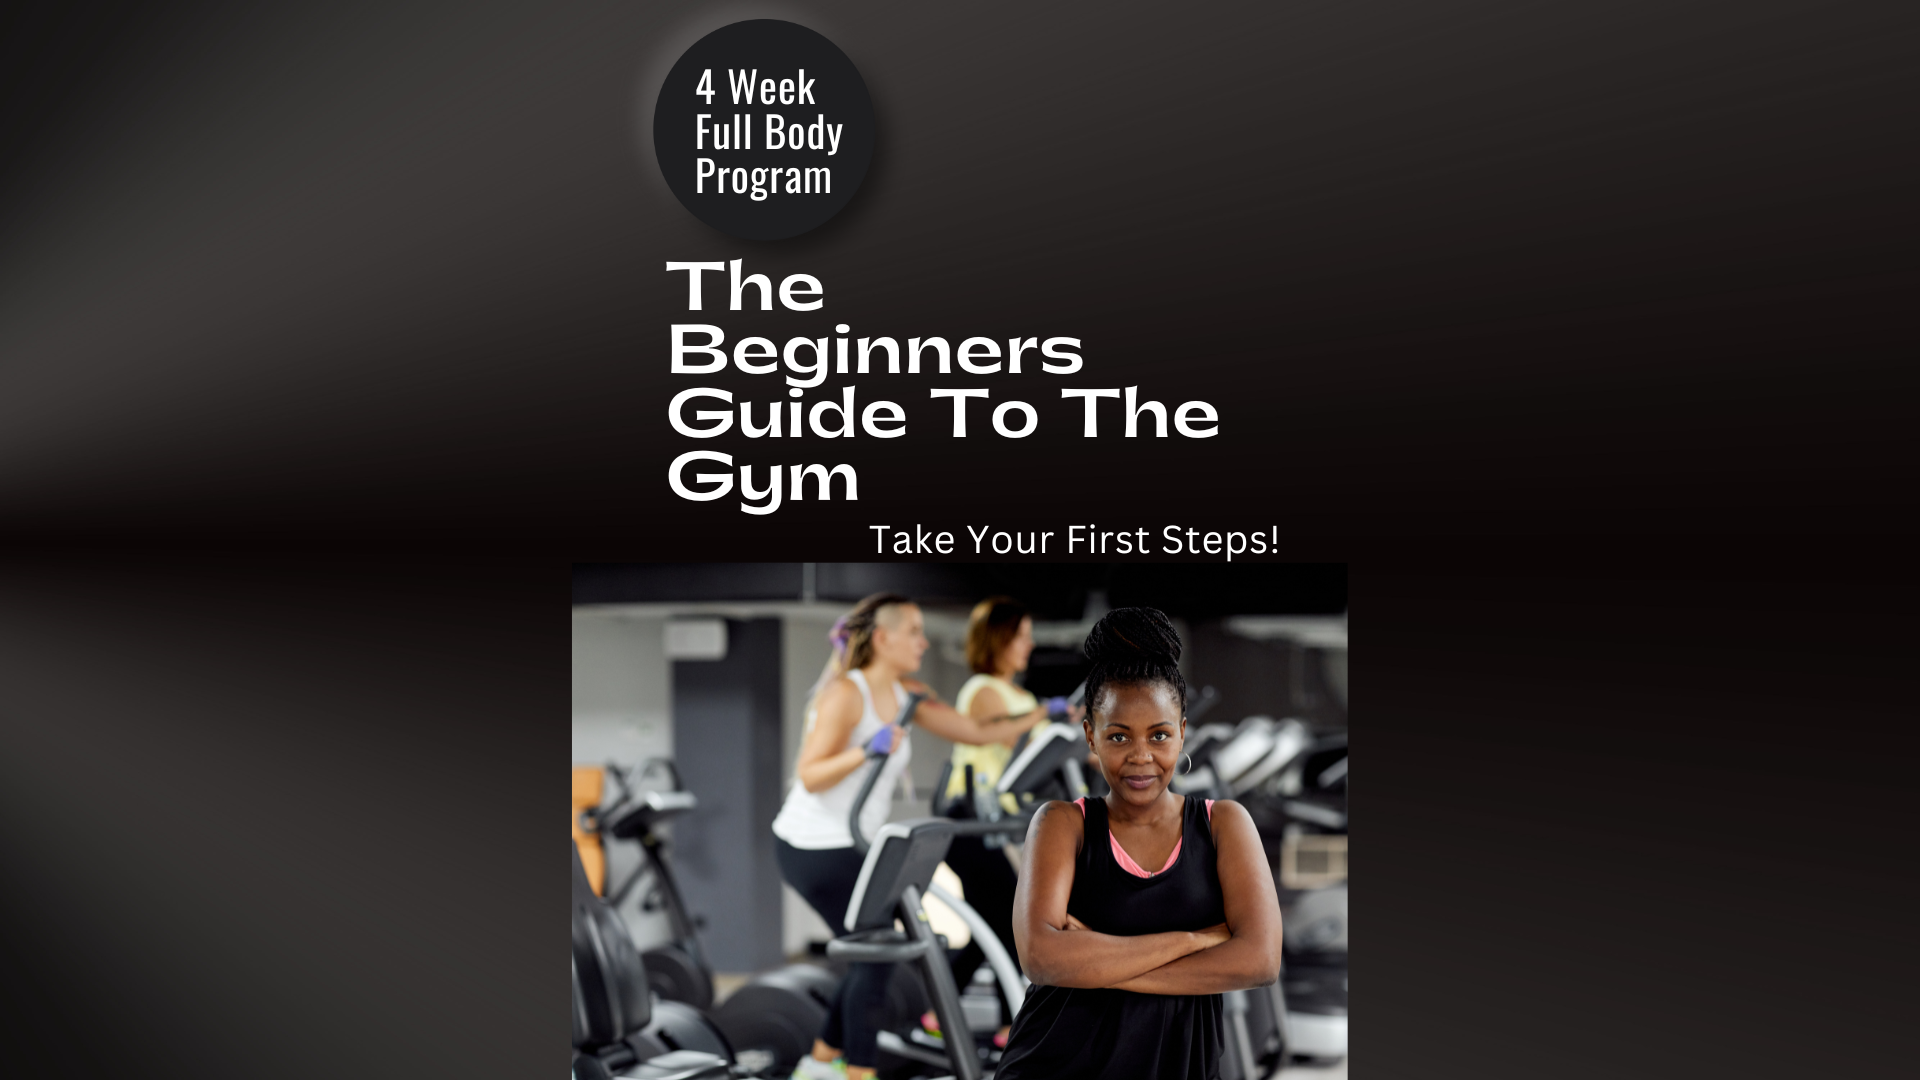 The Beginners Guide To The Gym